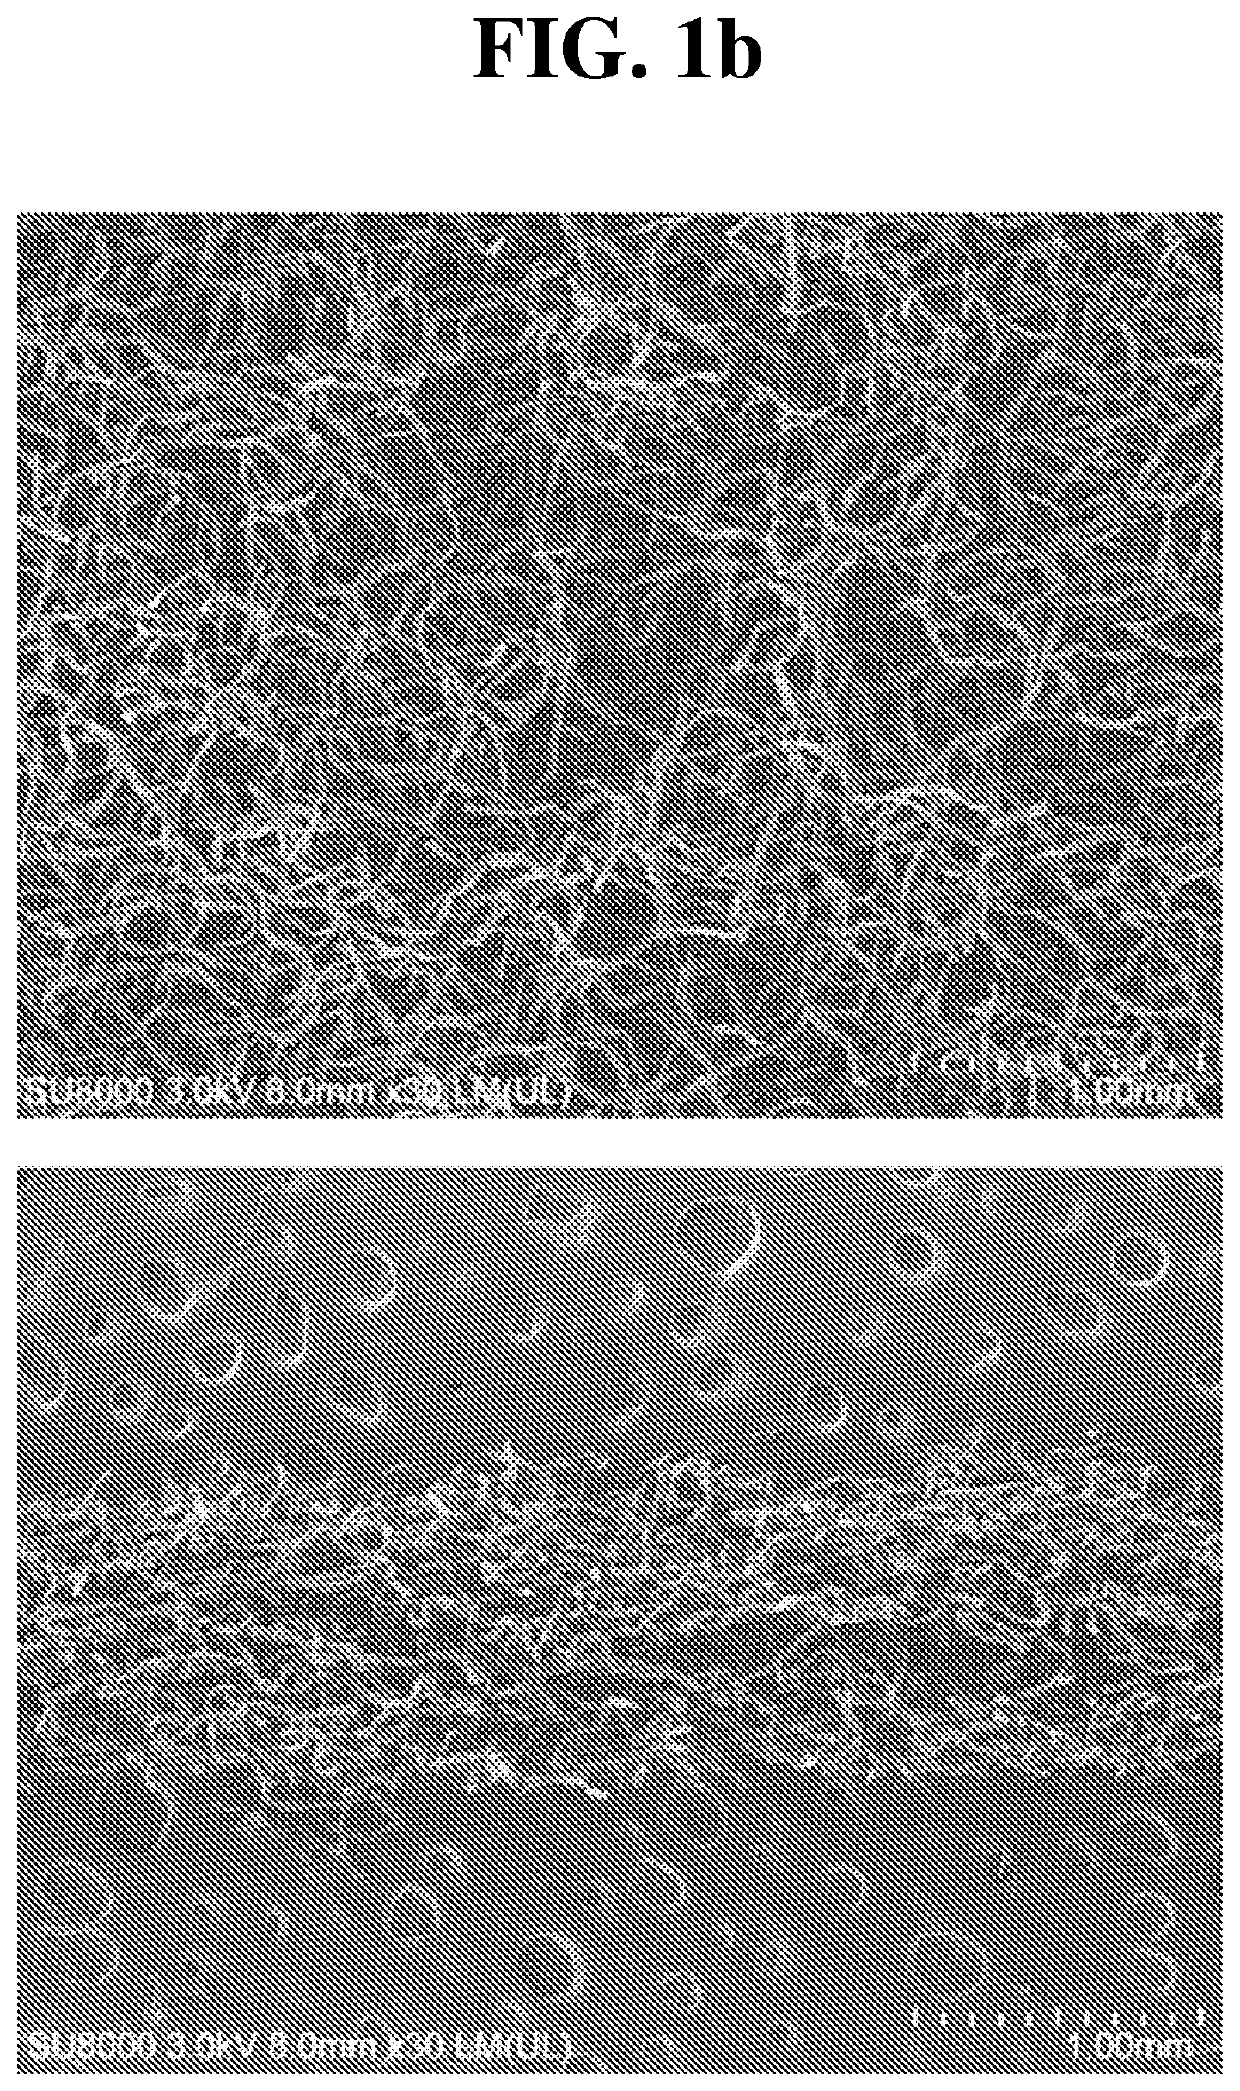 Medical fibrous structure comprising calcium carboxymethyl cellulose and chitosan compound and process for preparing the same